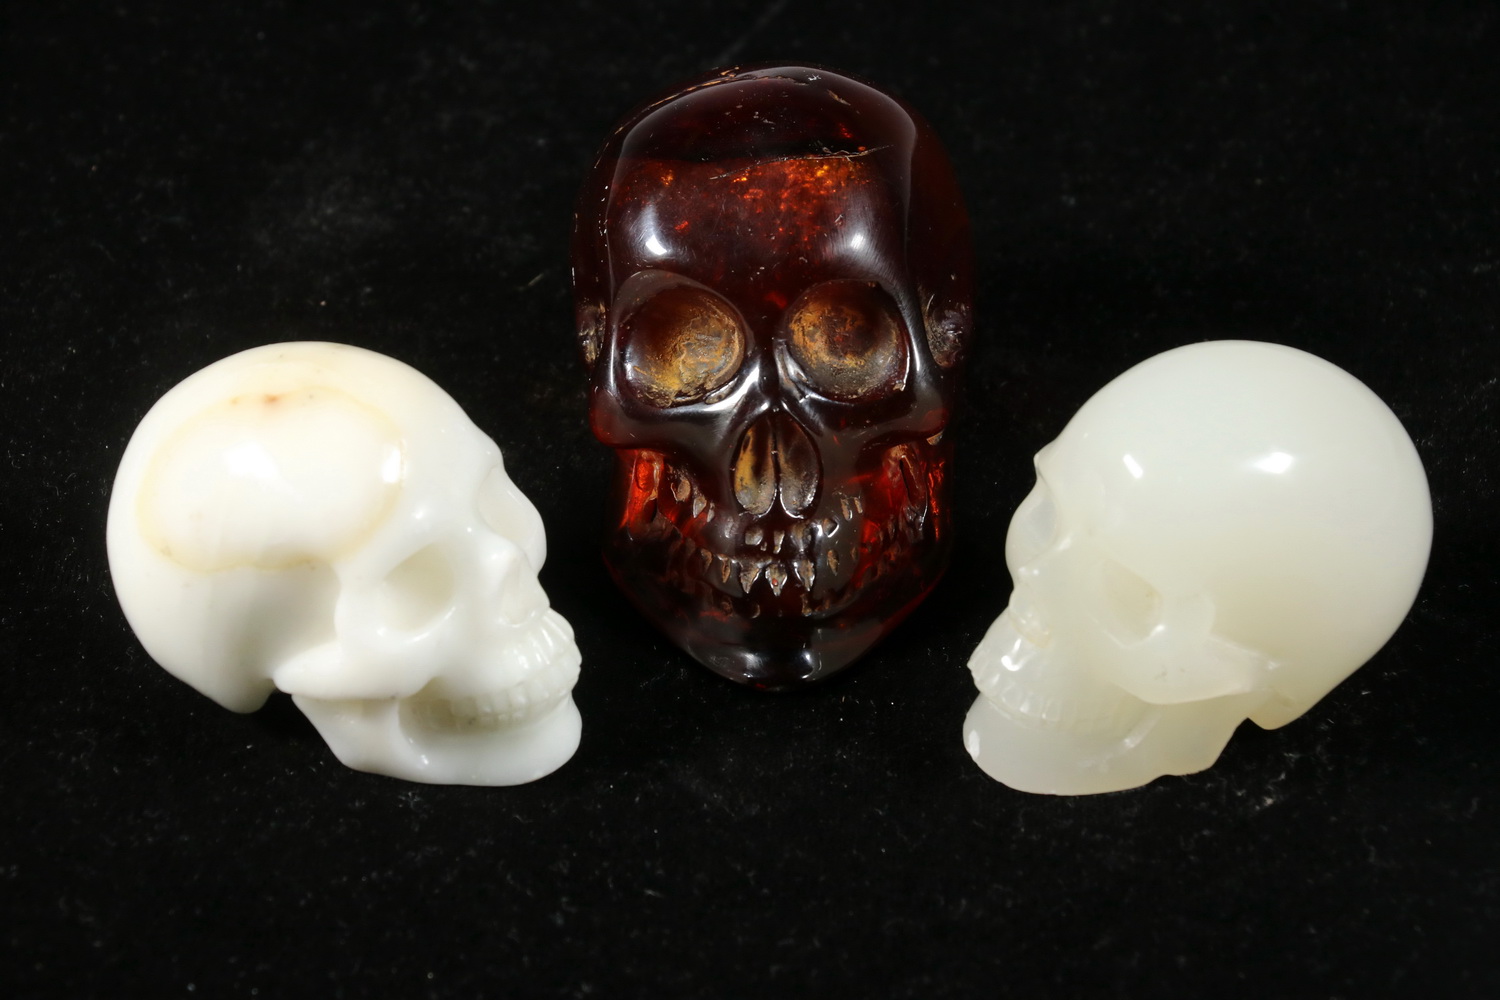  3 SMALL CARVED CHINESE SKULLS 2b1bfe